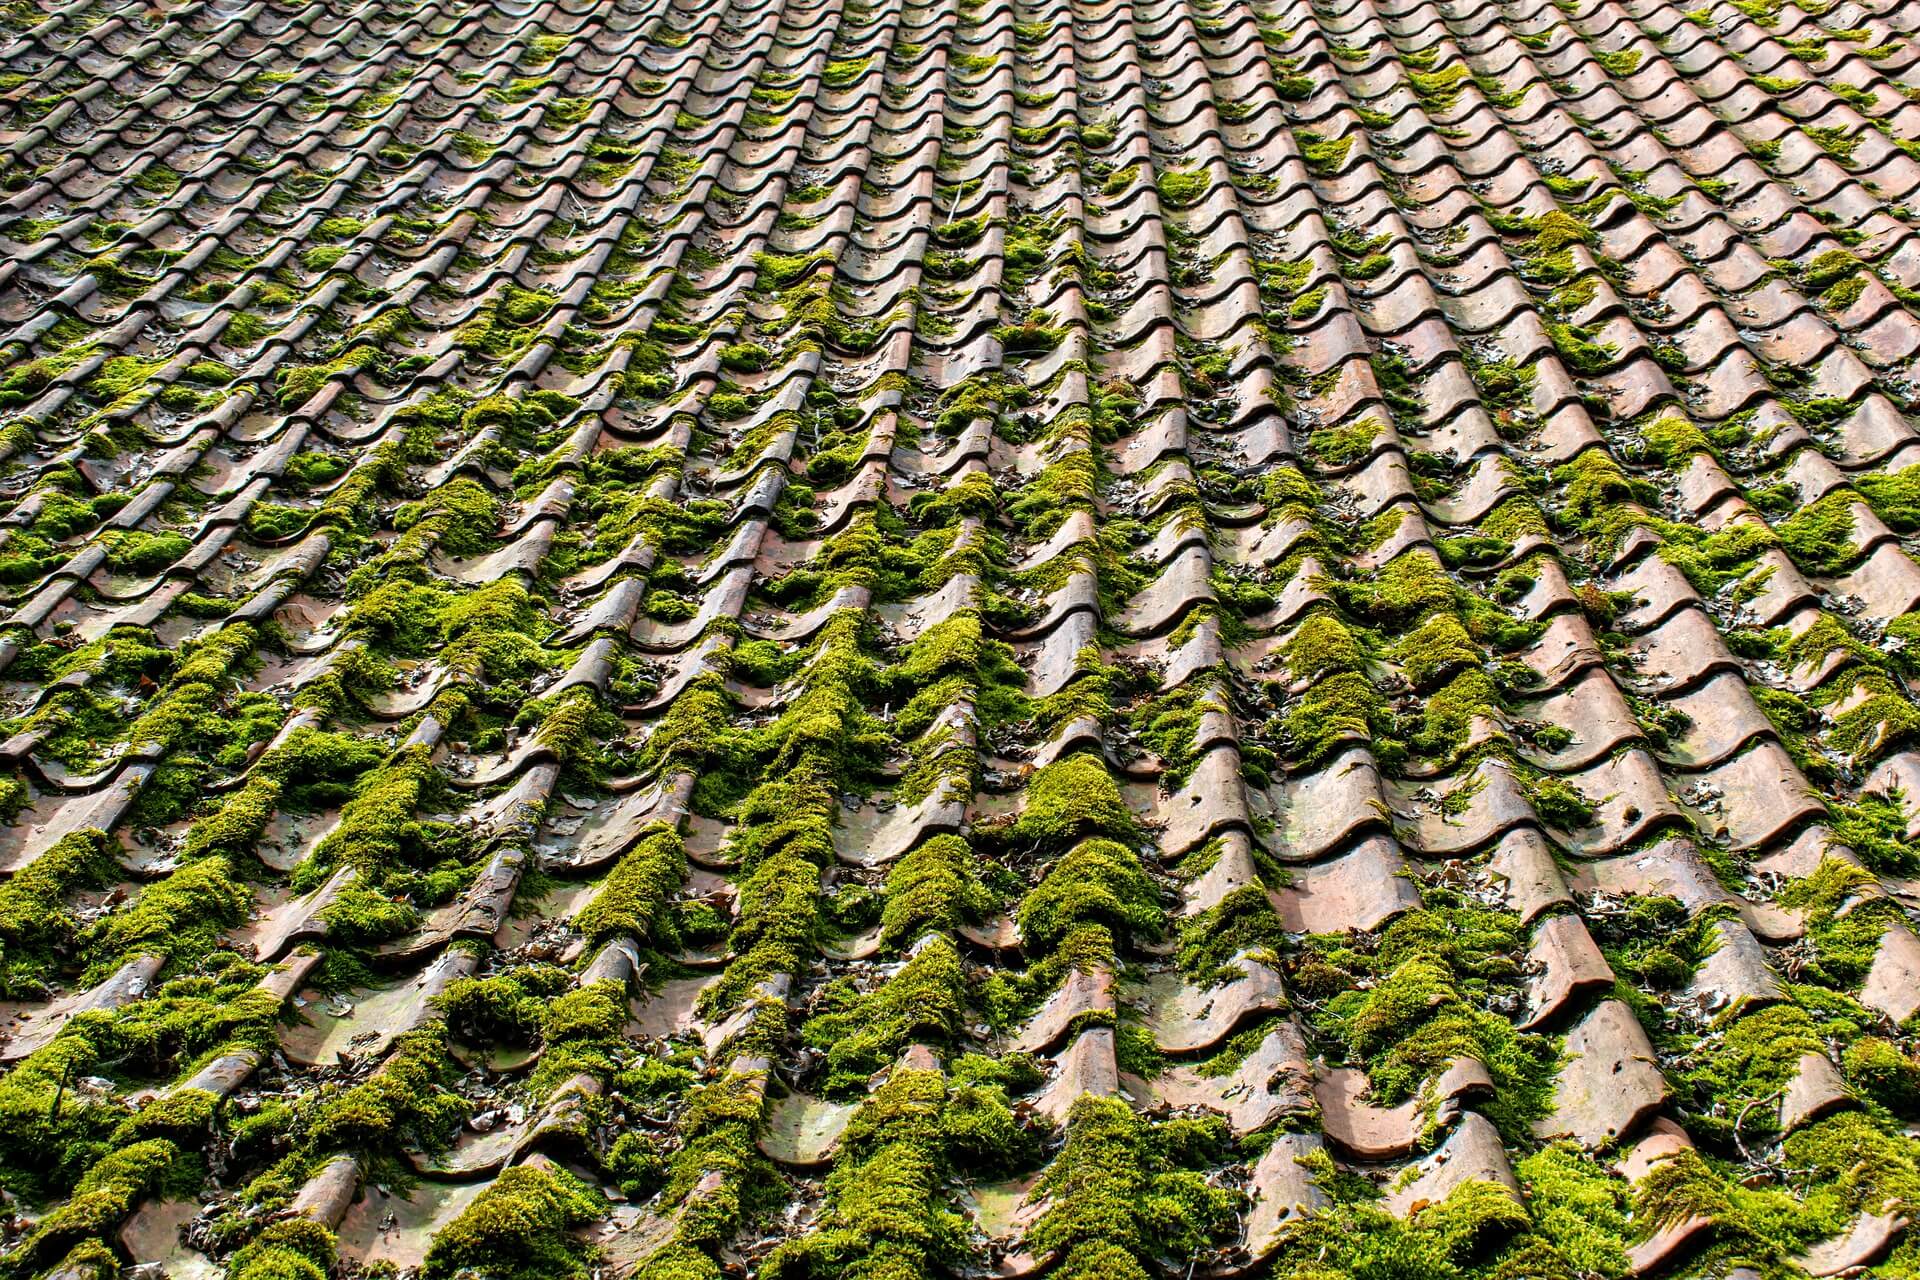 Clay roof tiles with moss